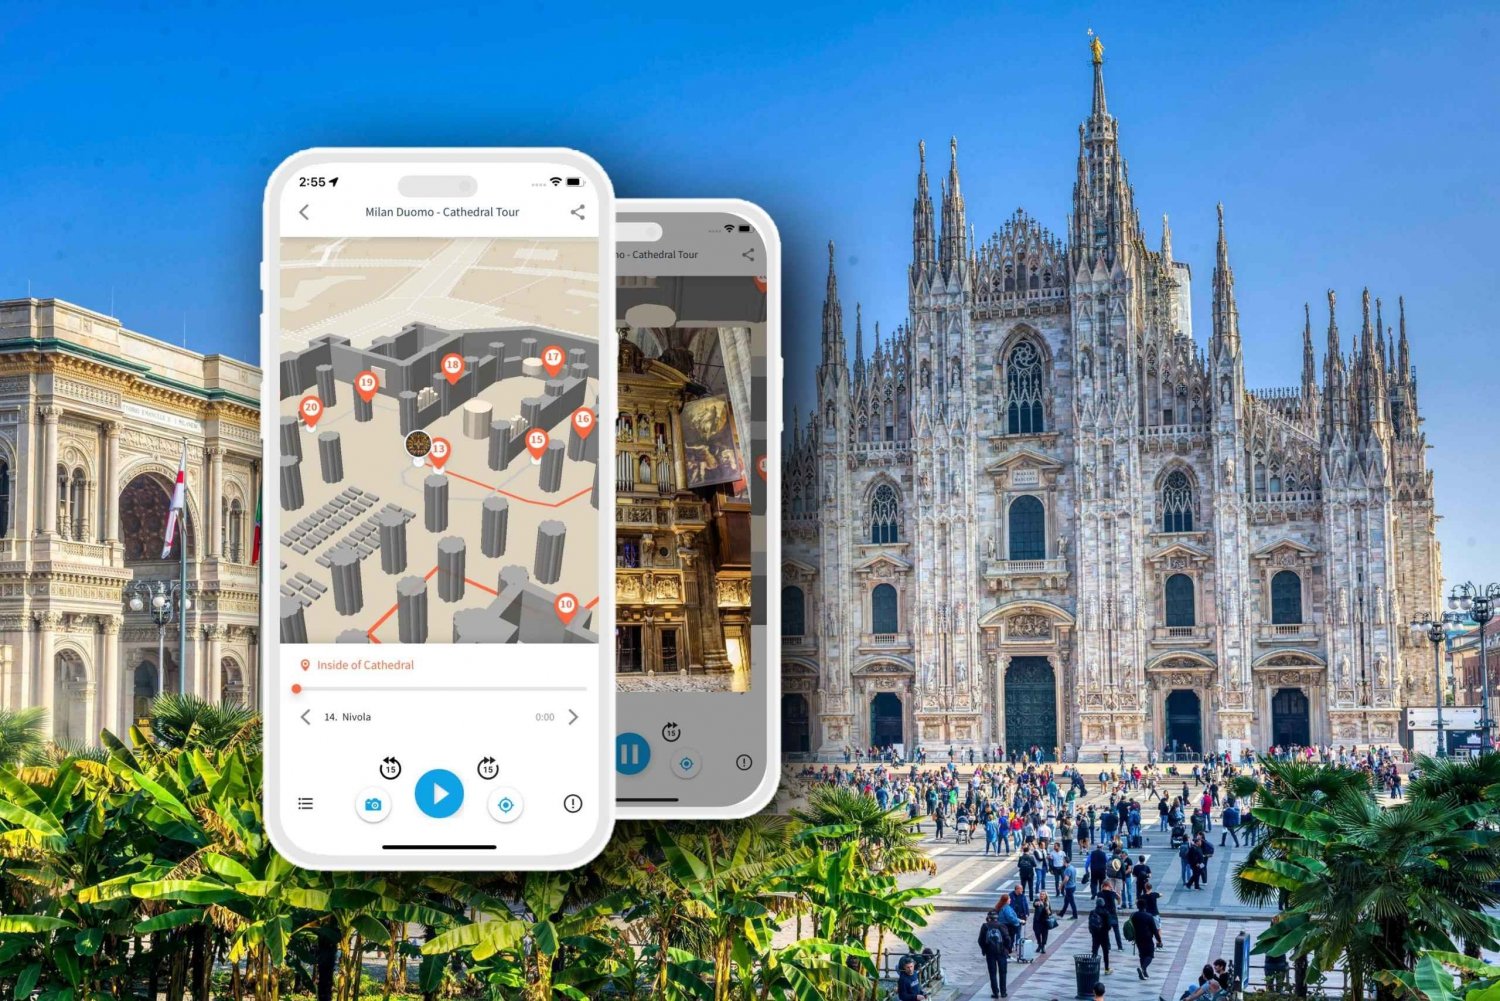 Self-guided tour of Milan's Duomo with an audio guide